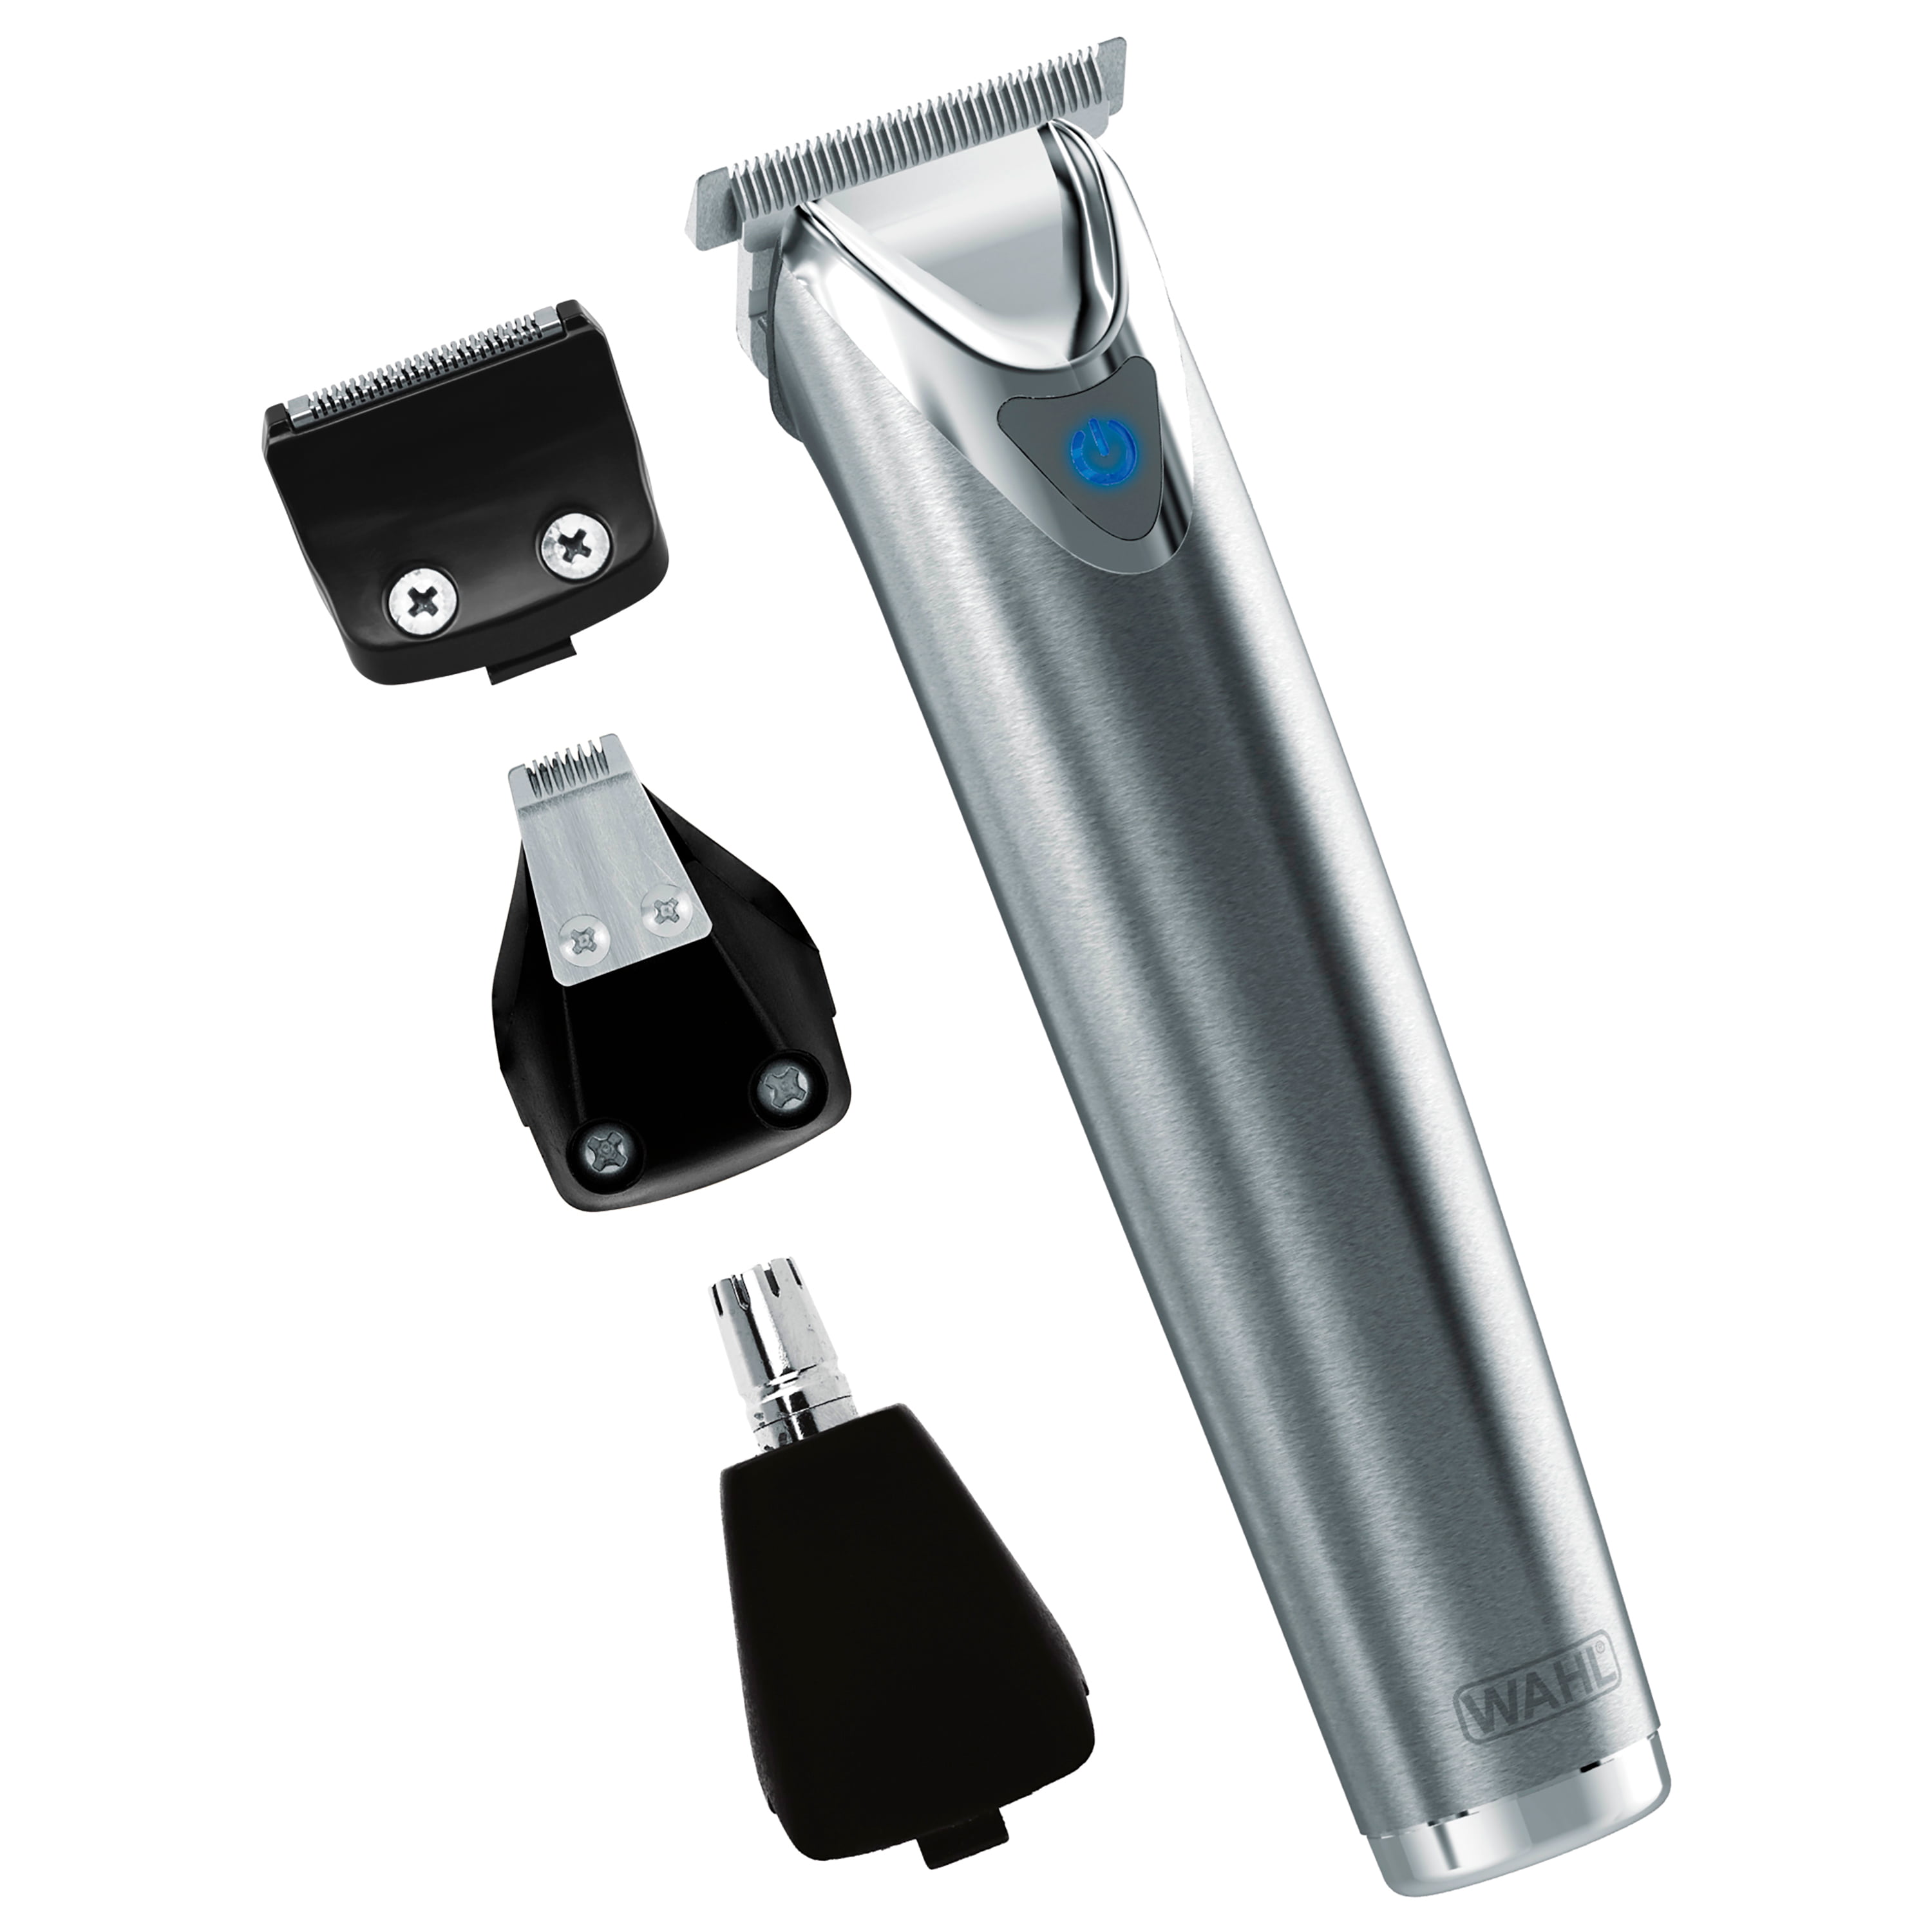 Wahl Lithium Ion Trimmer Stainless Steel